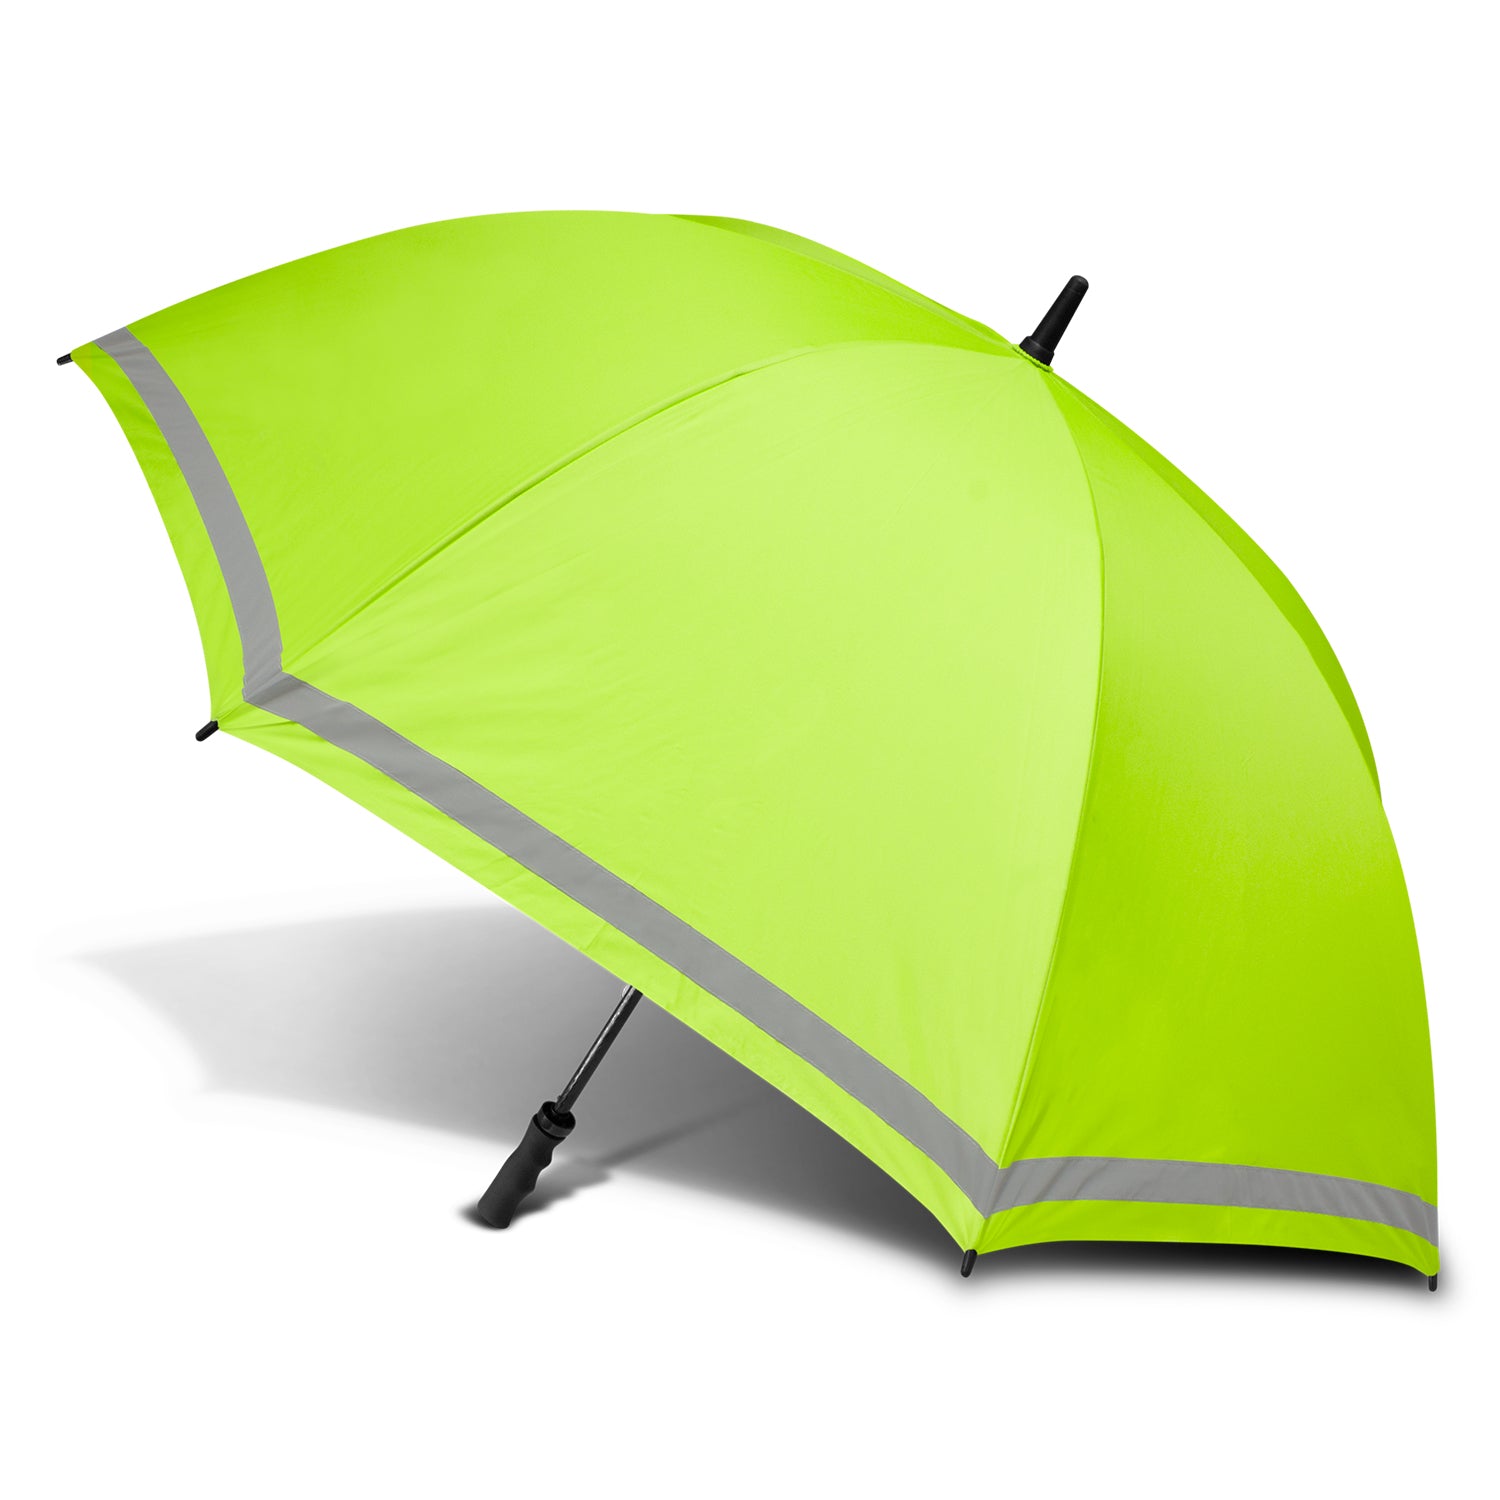 STORMPROOF SAFETY®️ - Robust Safety Umbrella with Fluoro Yellow Hi-Vis Canopy with Reflective Edging and Silver Underside, Windproof Fibreglass Frame and Fibreglass Shaft - Slide Open Mechanism